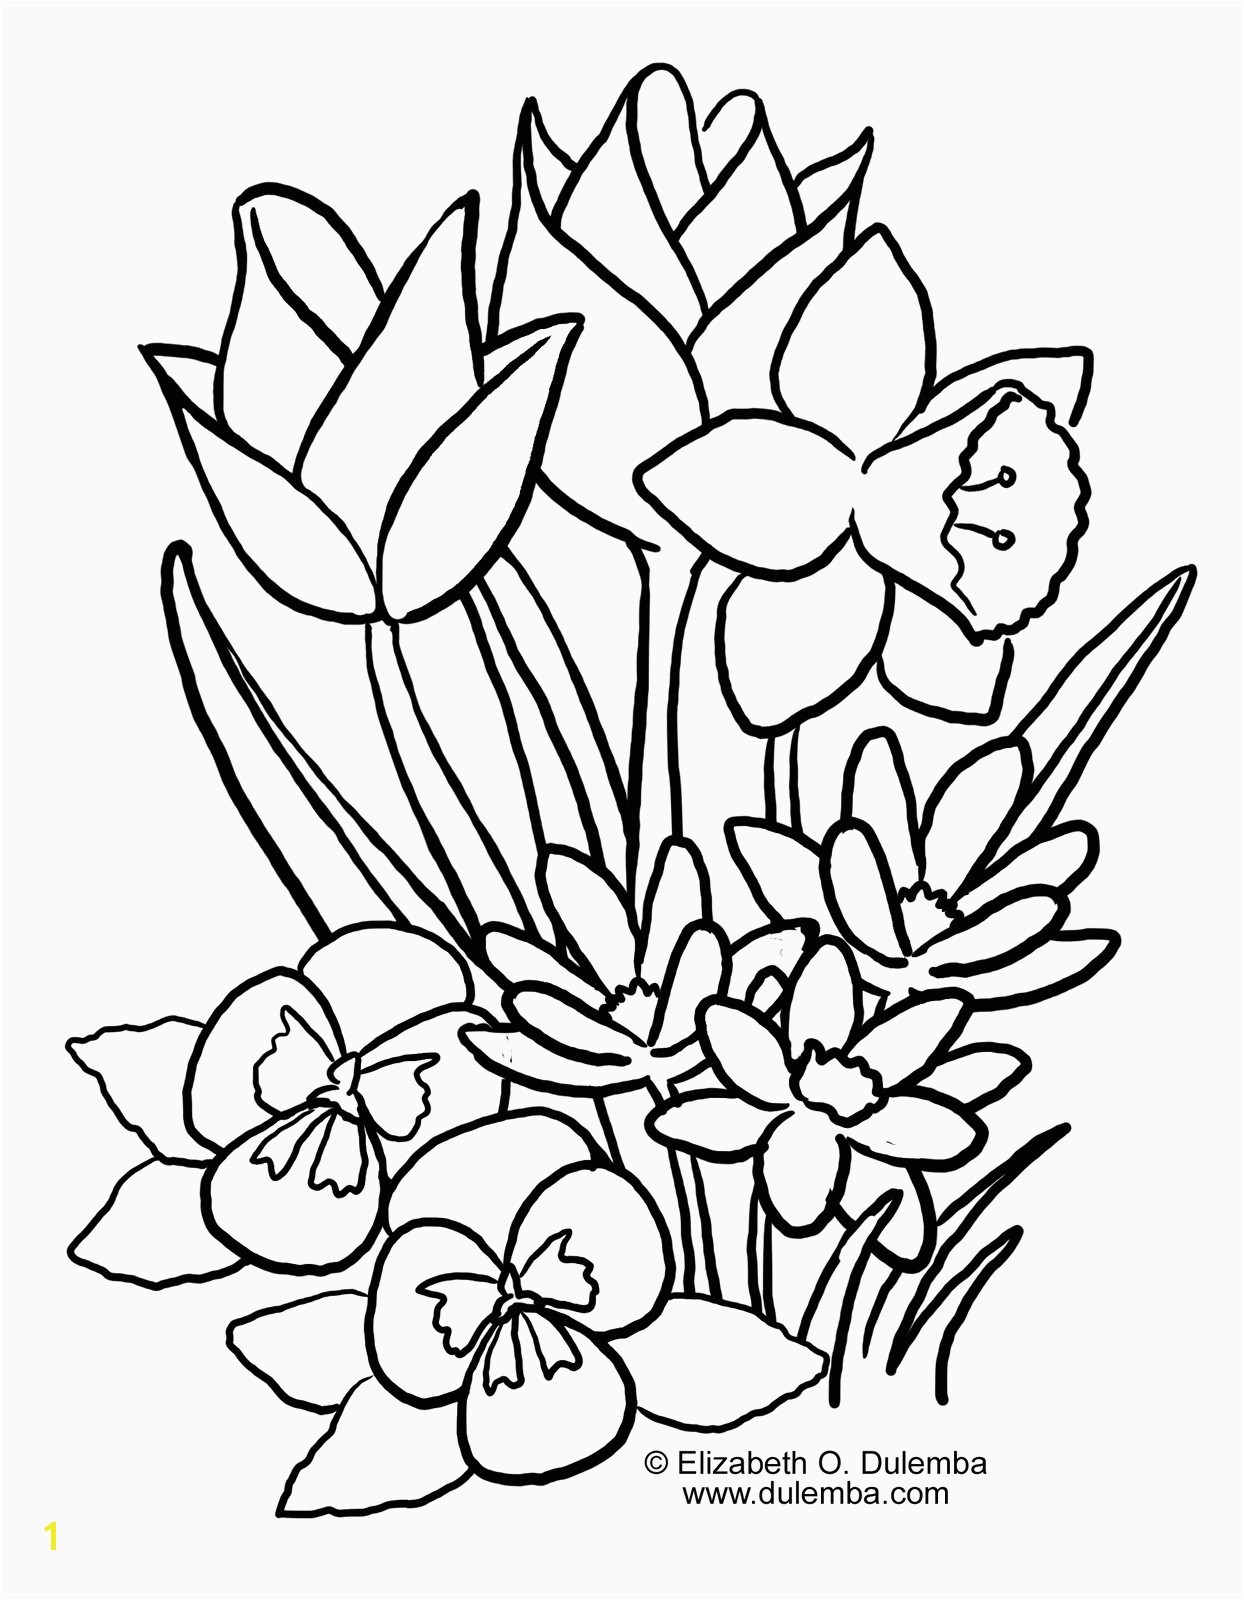 Coloring for Adults Inspirational Cool Vases Flower Vase Coloring Page Pages Flowers In A top I